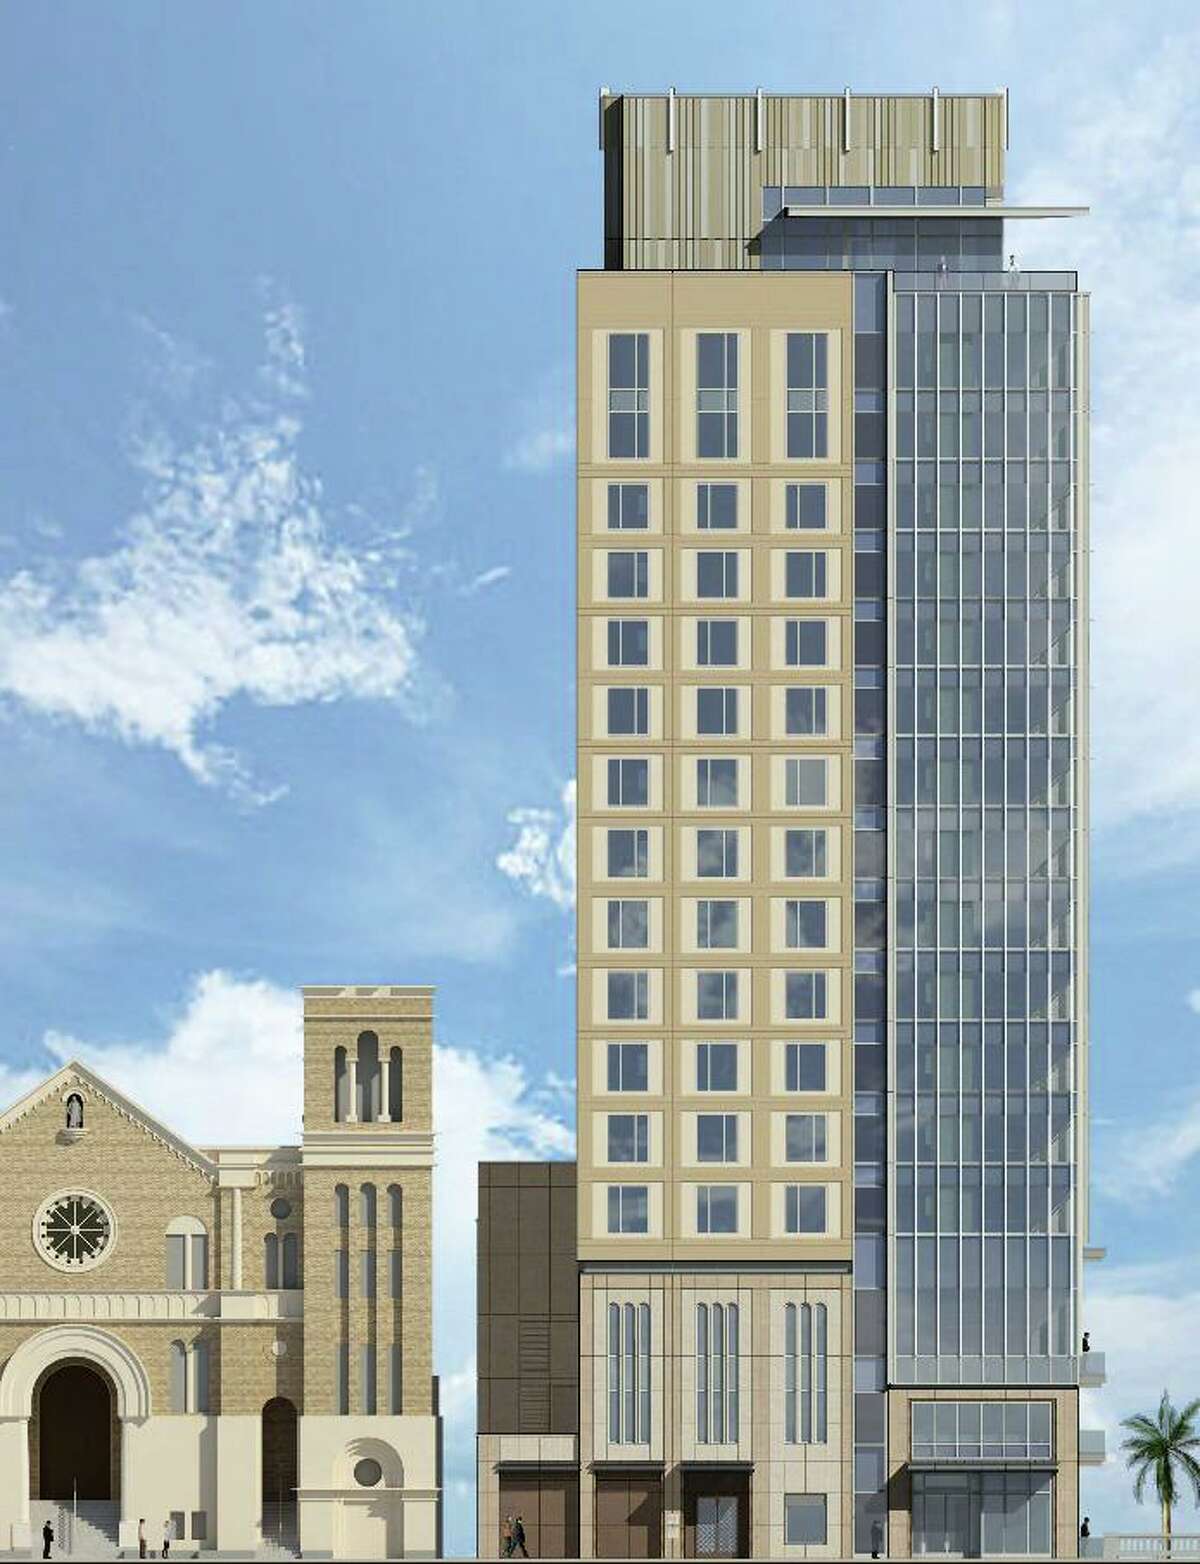 Renderings show a proposed hotel next to St. Mary’s Catholic Church in downtown San Antonio.